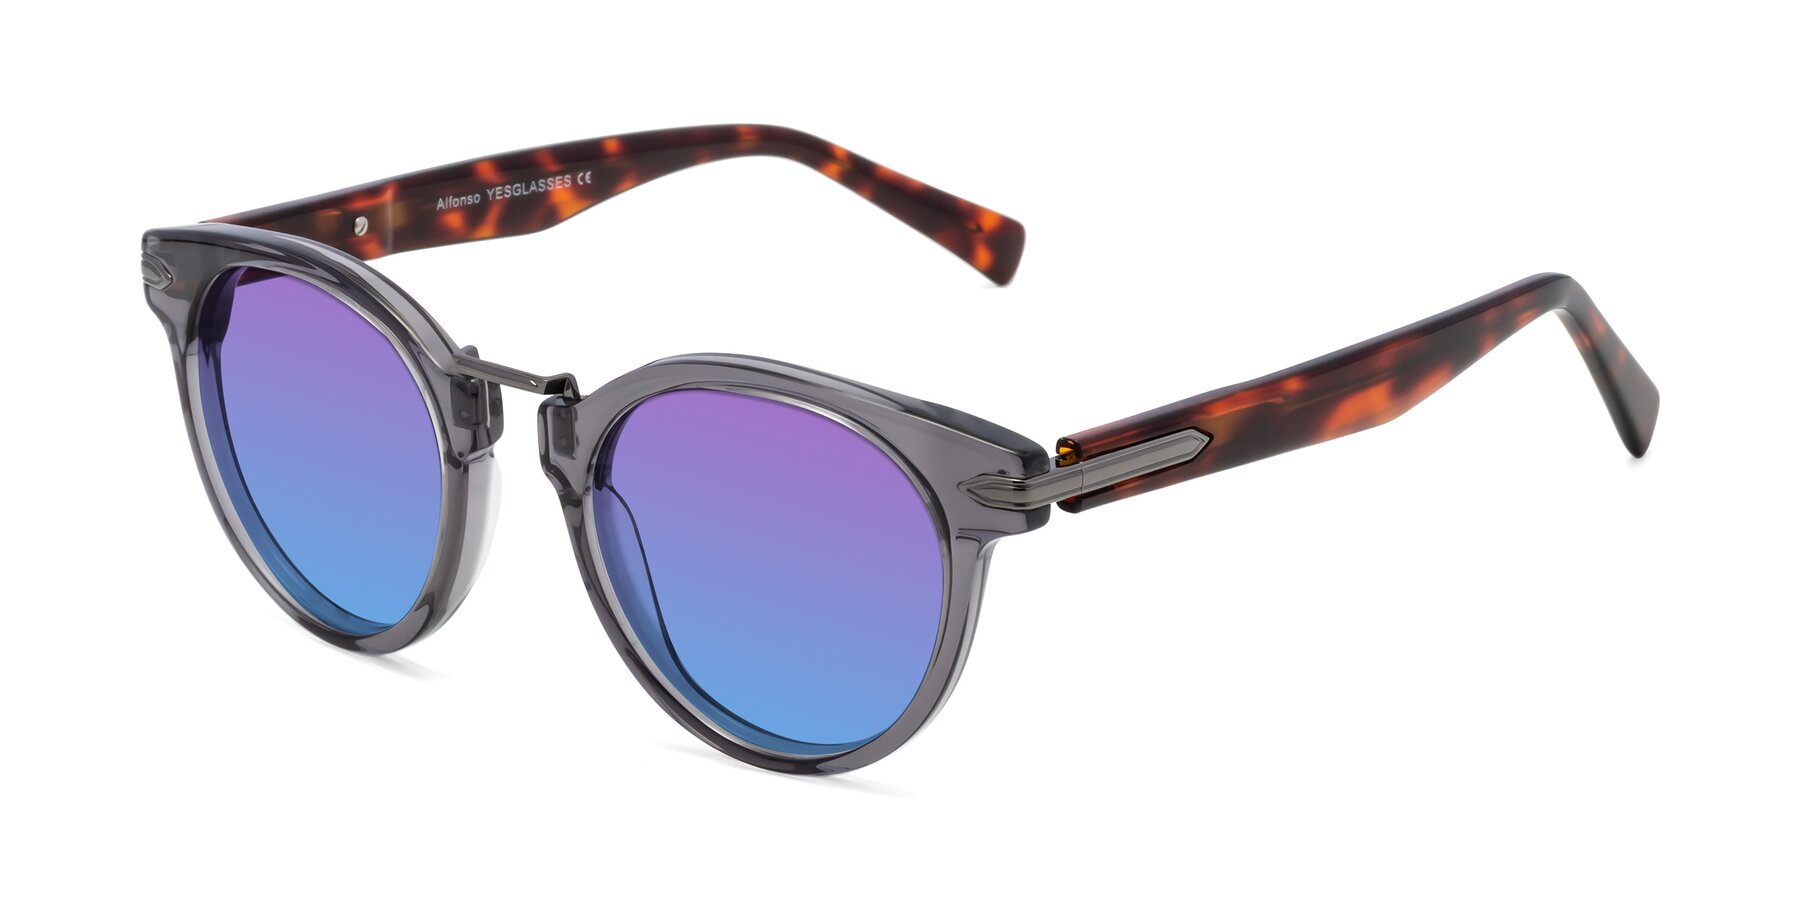 Angle of Alfonso in Gray /Tortoise with Purple / Blue Gradient Lenses